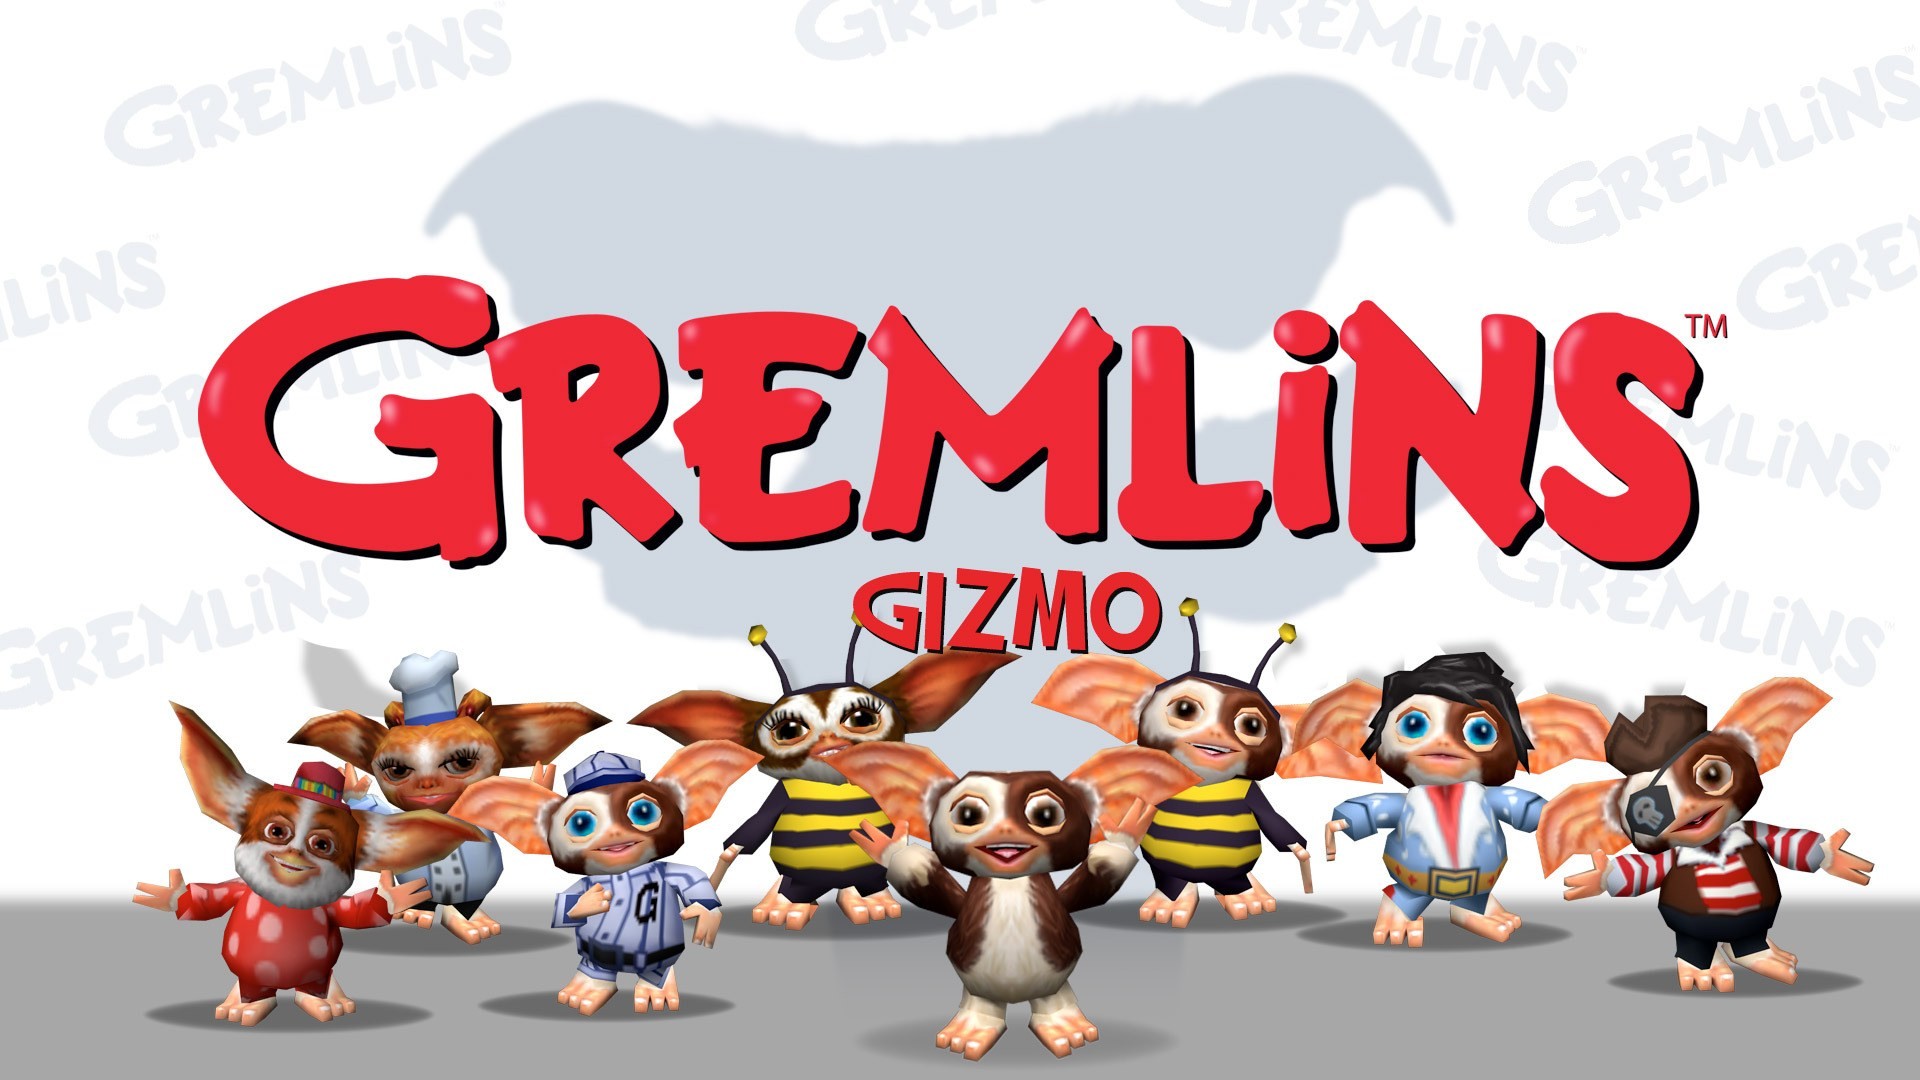 1920x1080 Amazing Gizmo From Gremlins Wallpaper These are High Quality and High  Definition HD Wallpapers For PC